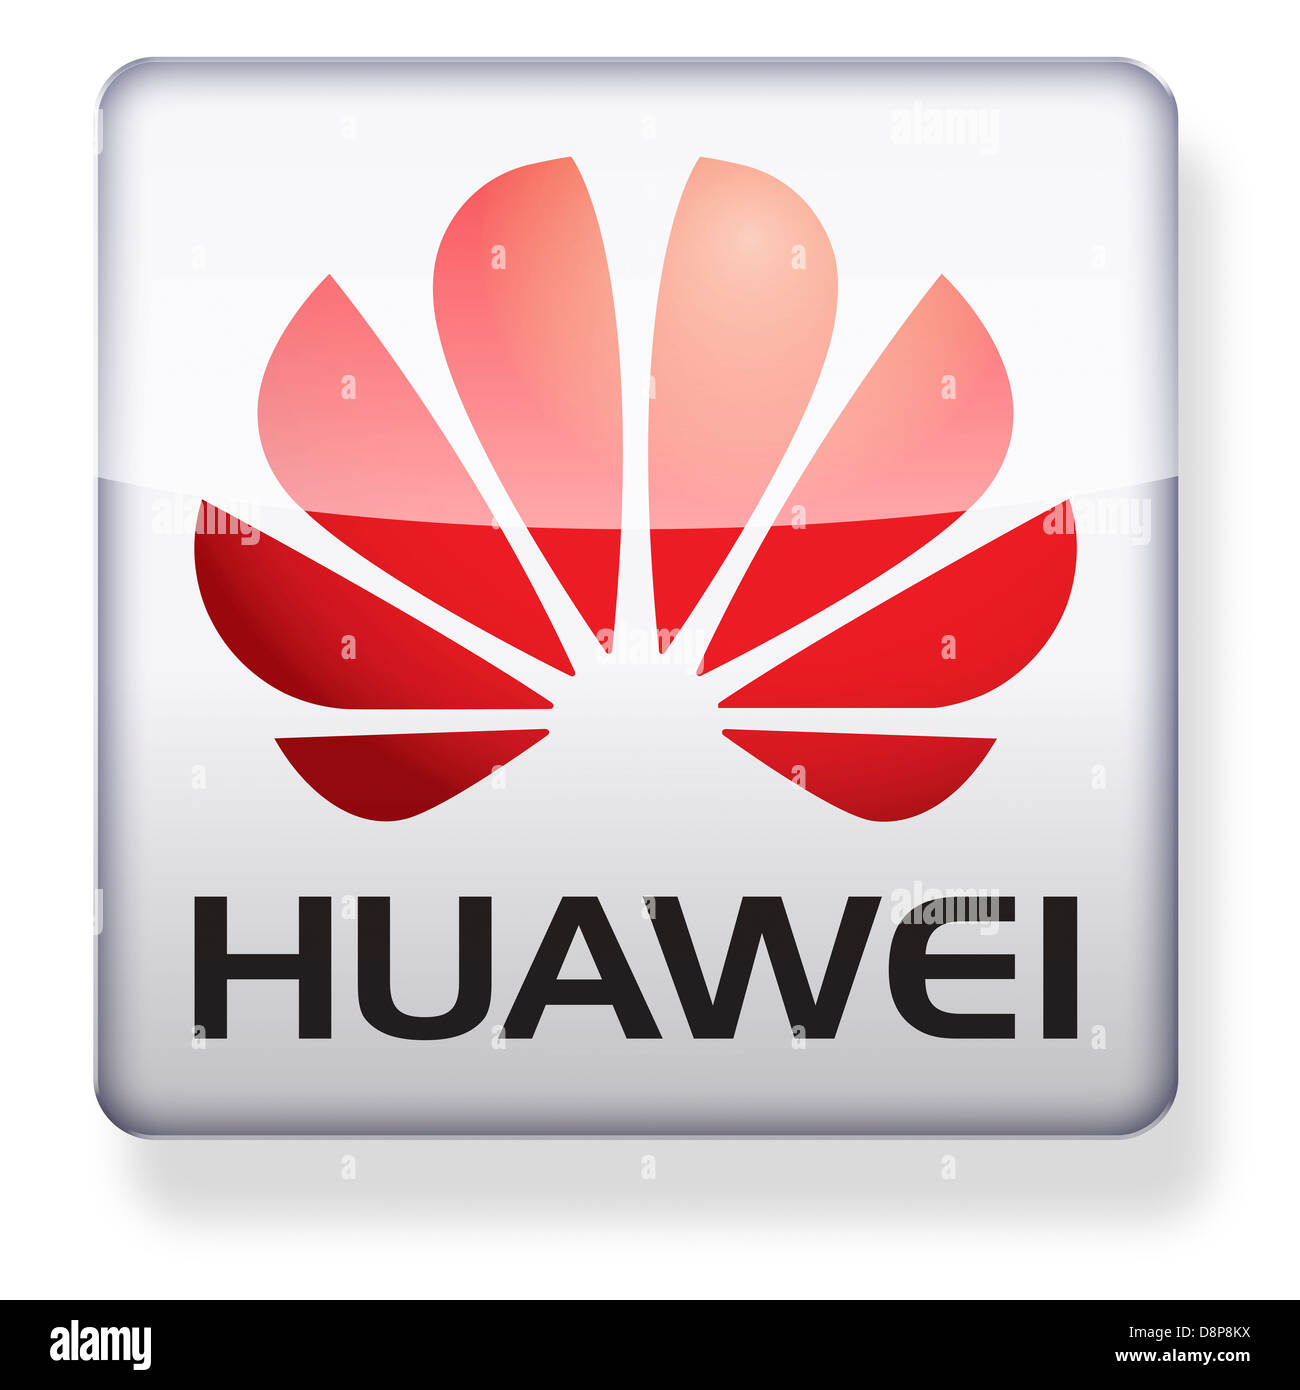 Huawei logo as an app icon. Clipping path included. Stock Photo